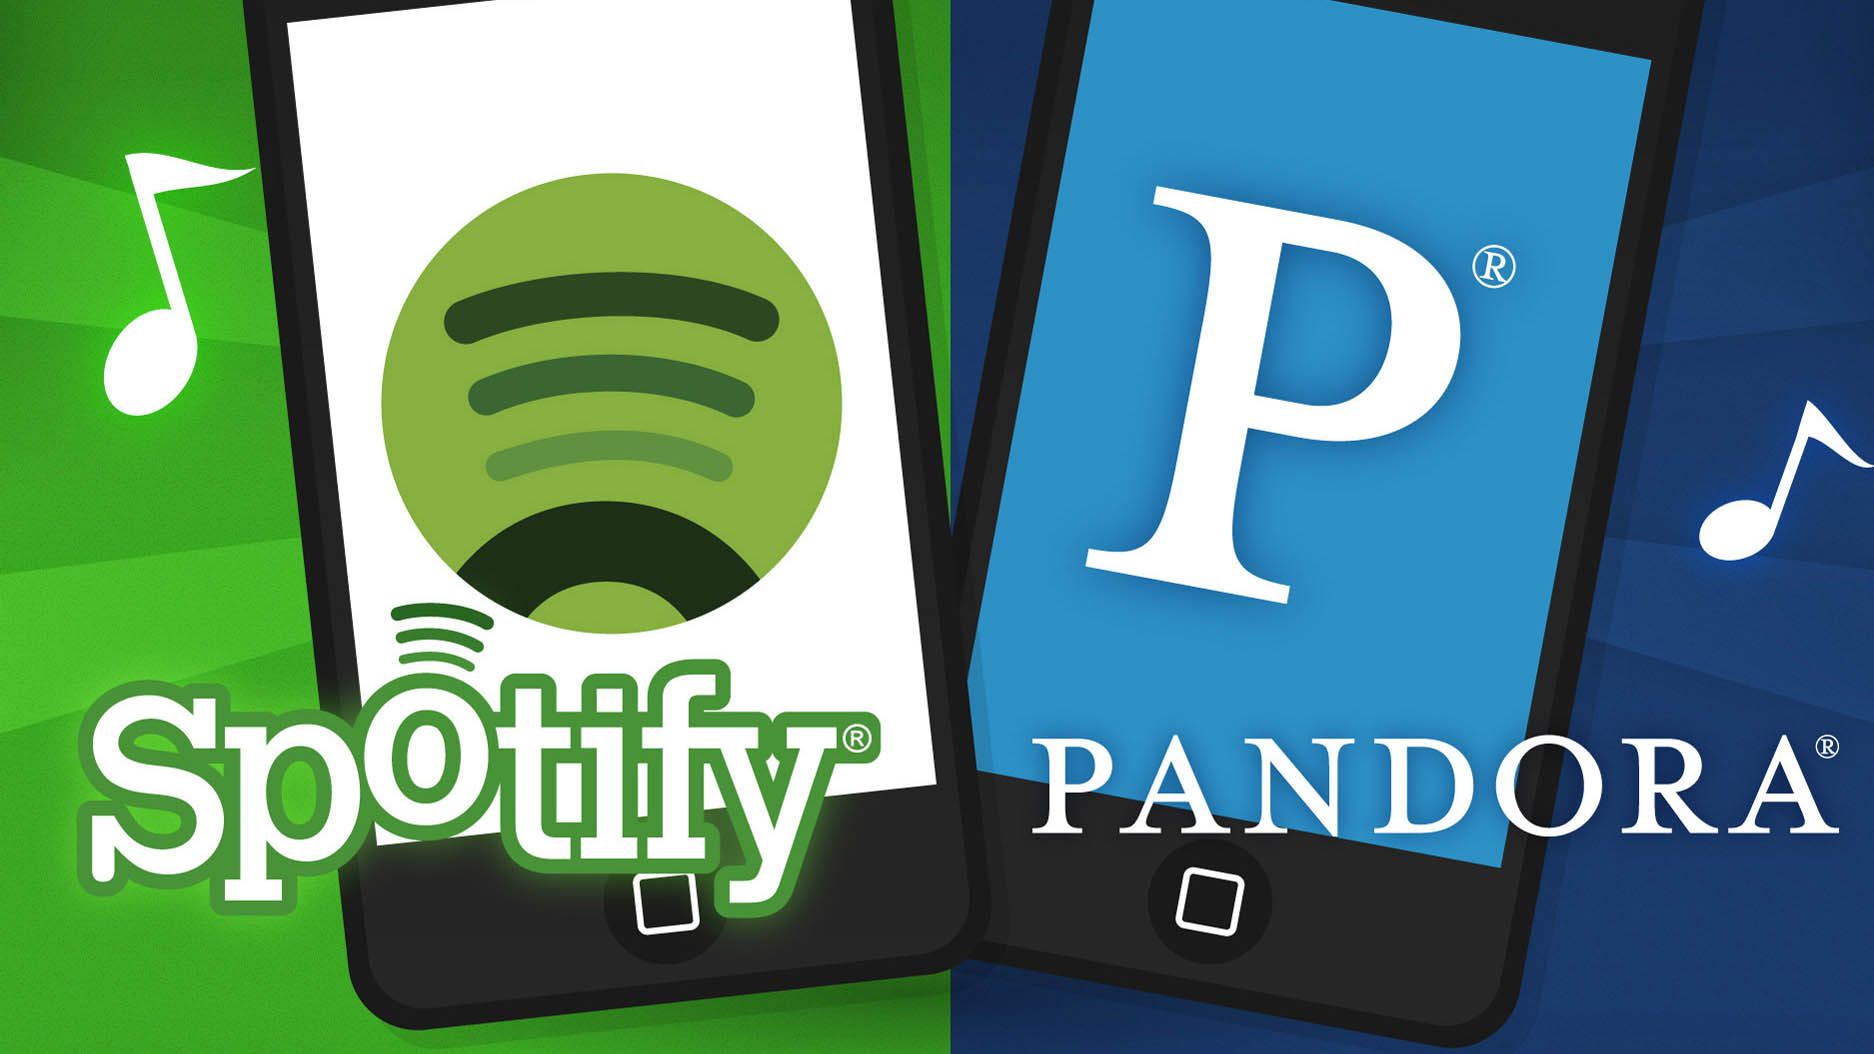 Pandora vs Spotify: Which one is better?